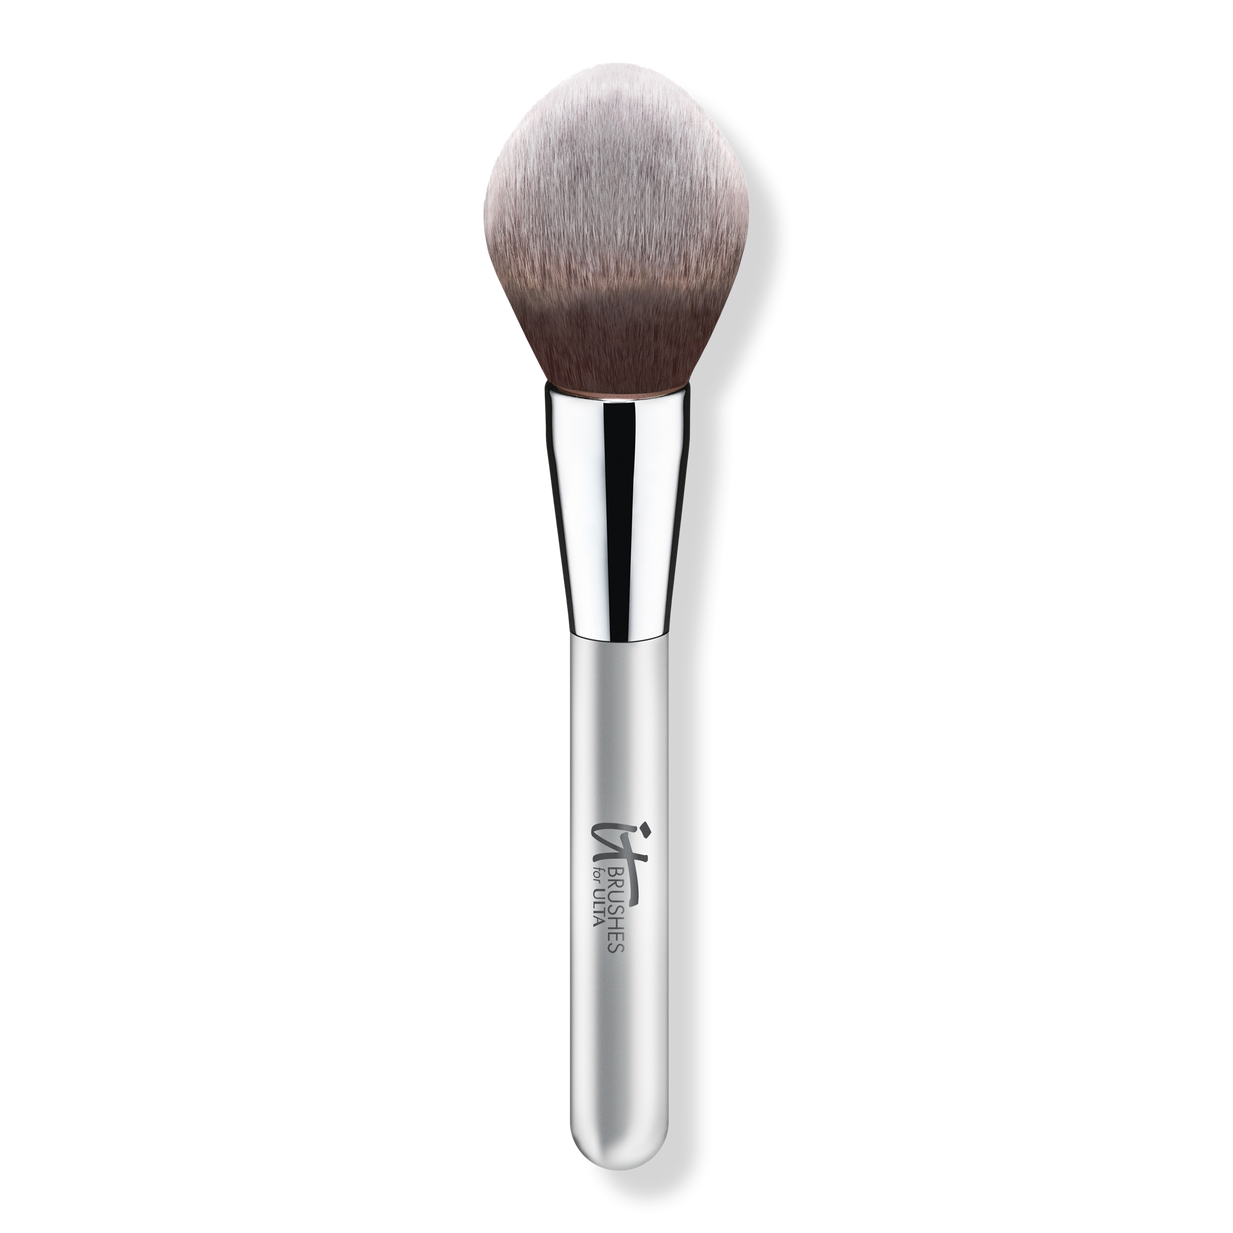 Okay lets start with a brush comparison! This new Chanel nail brush is